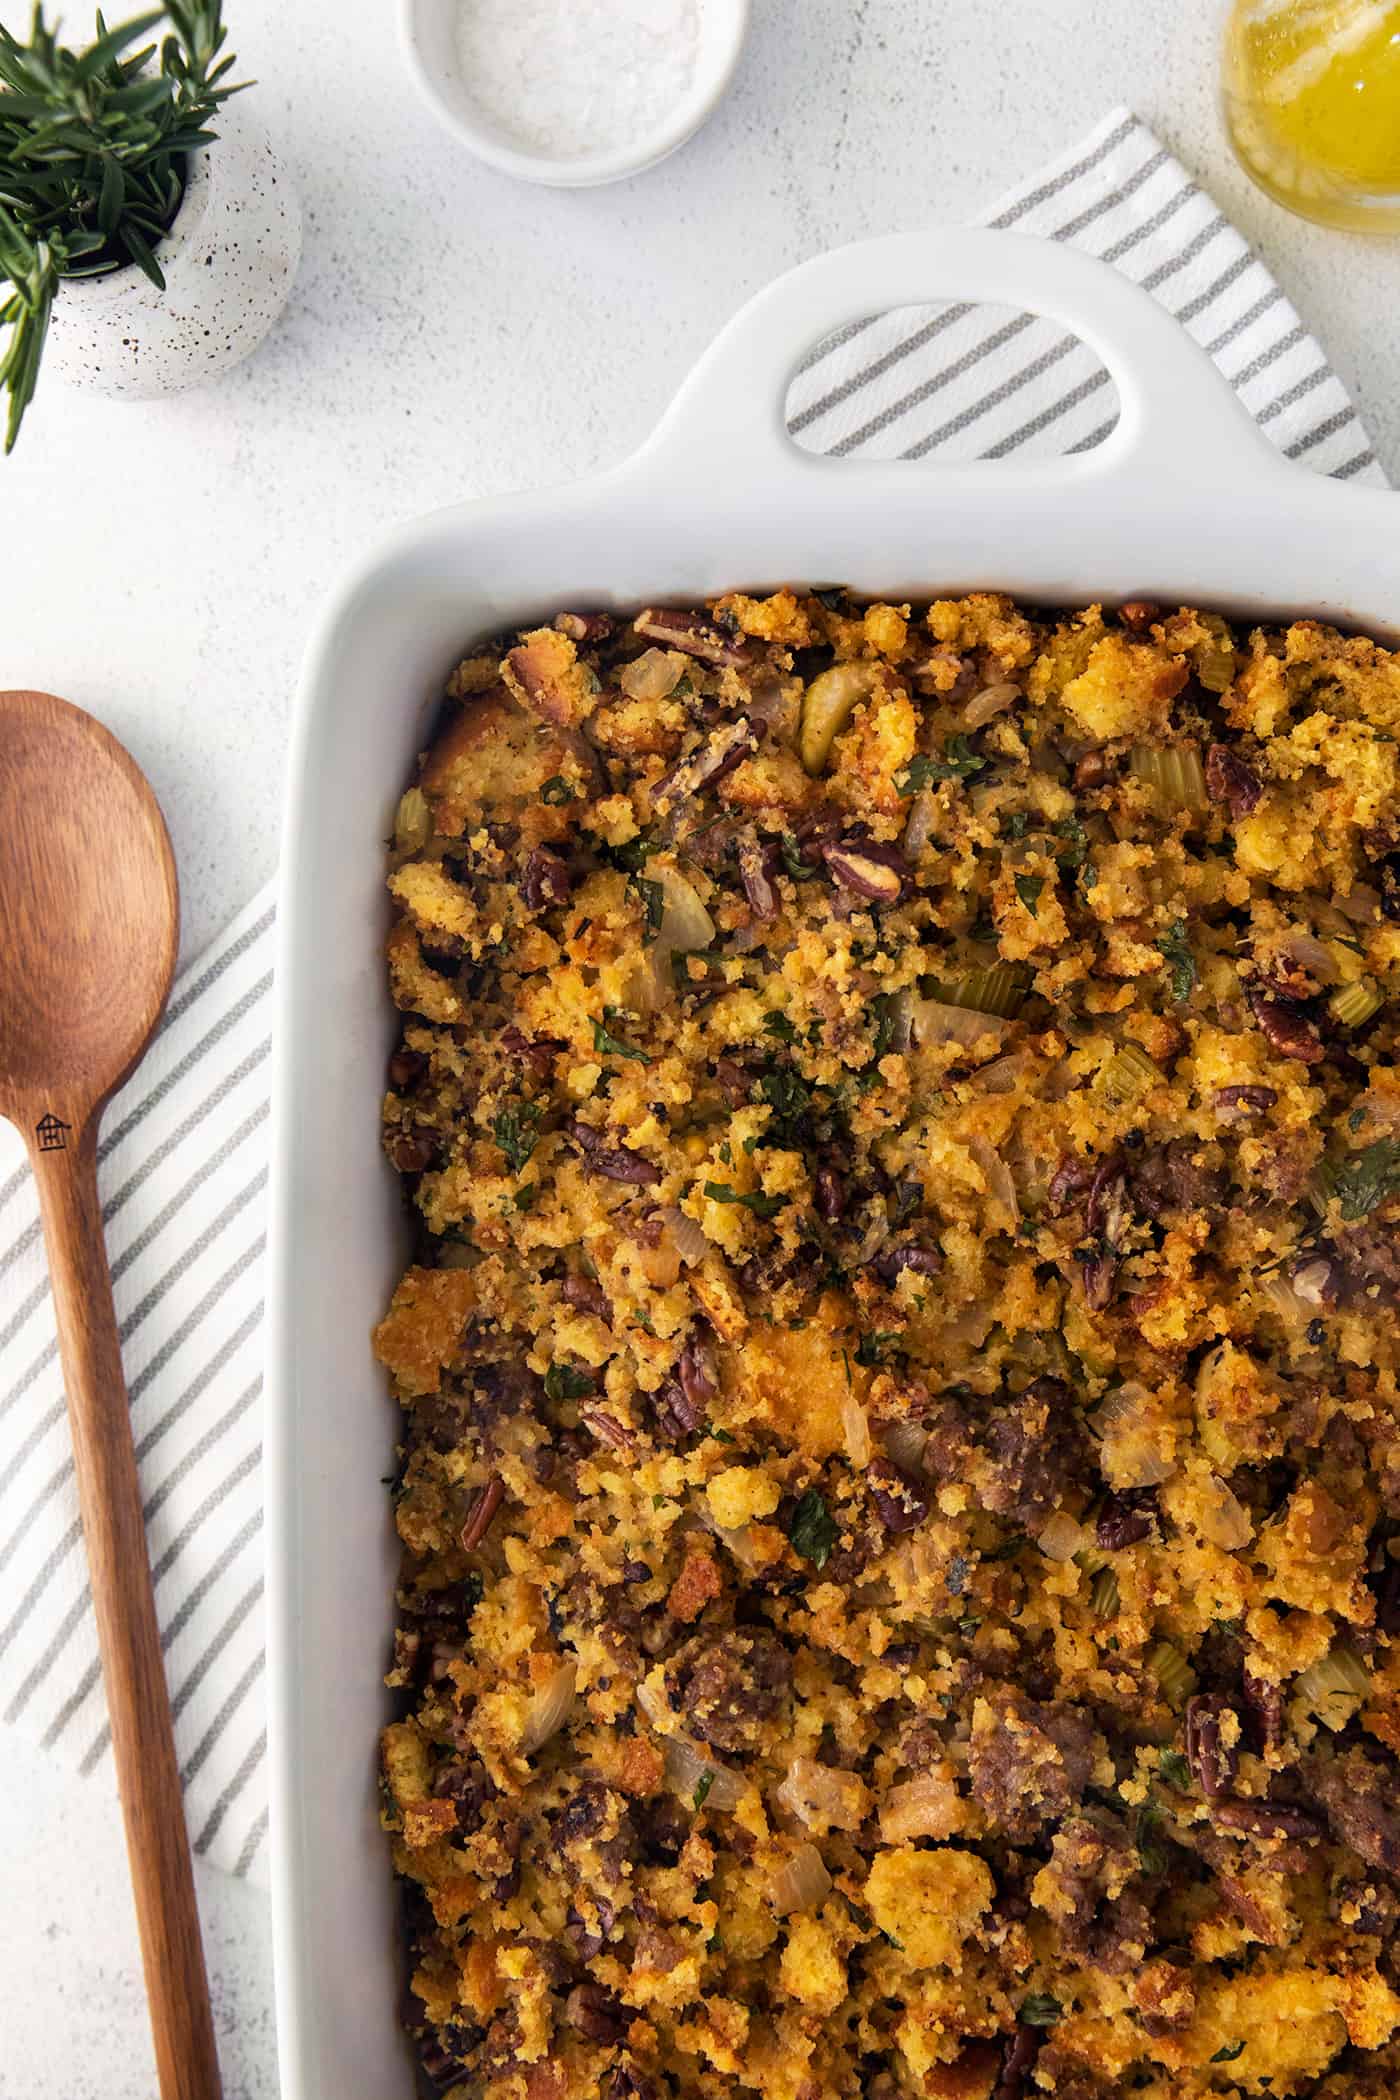 Cornbread dressing in a casserole dish with a wooden spoon next to it